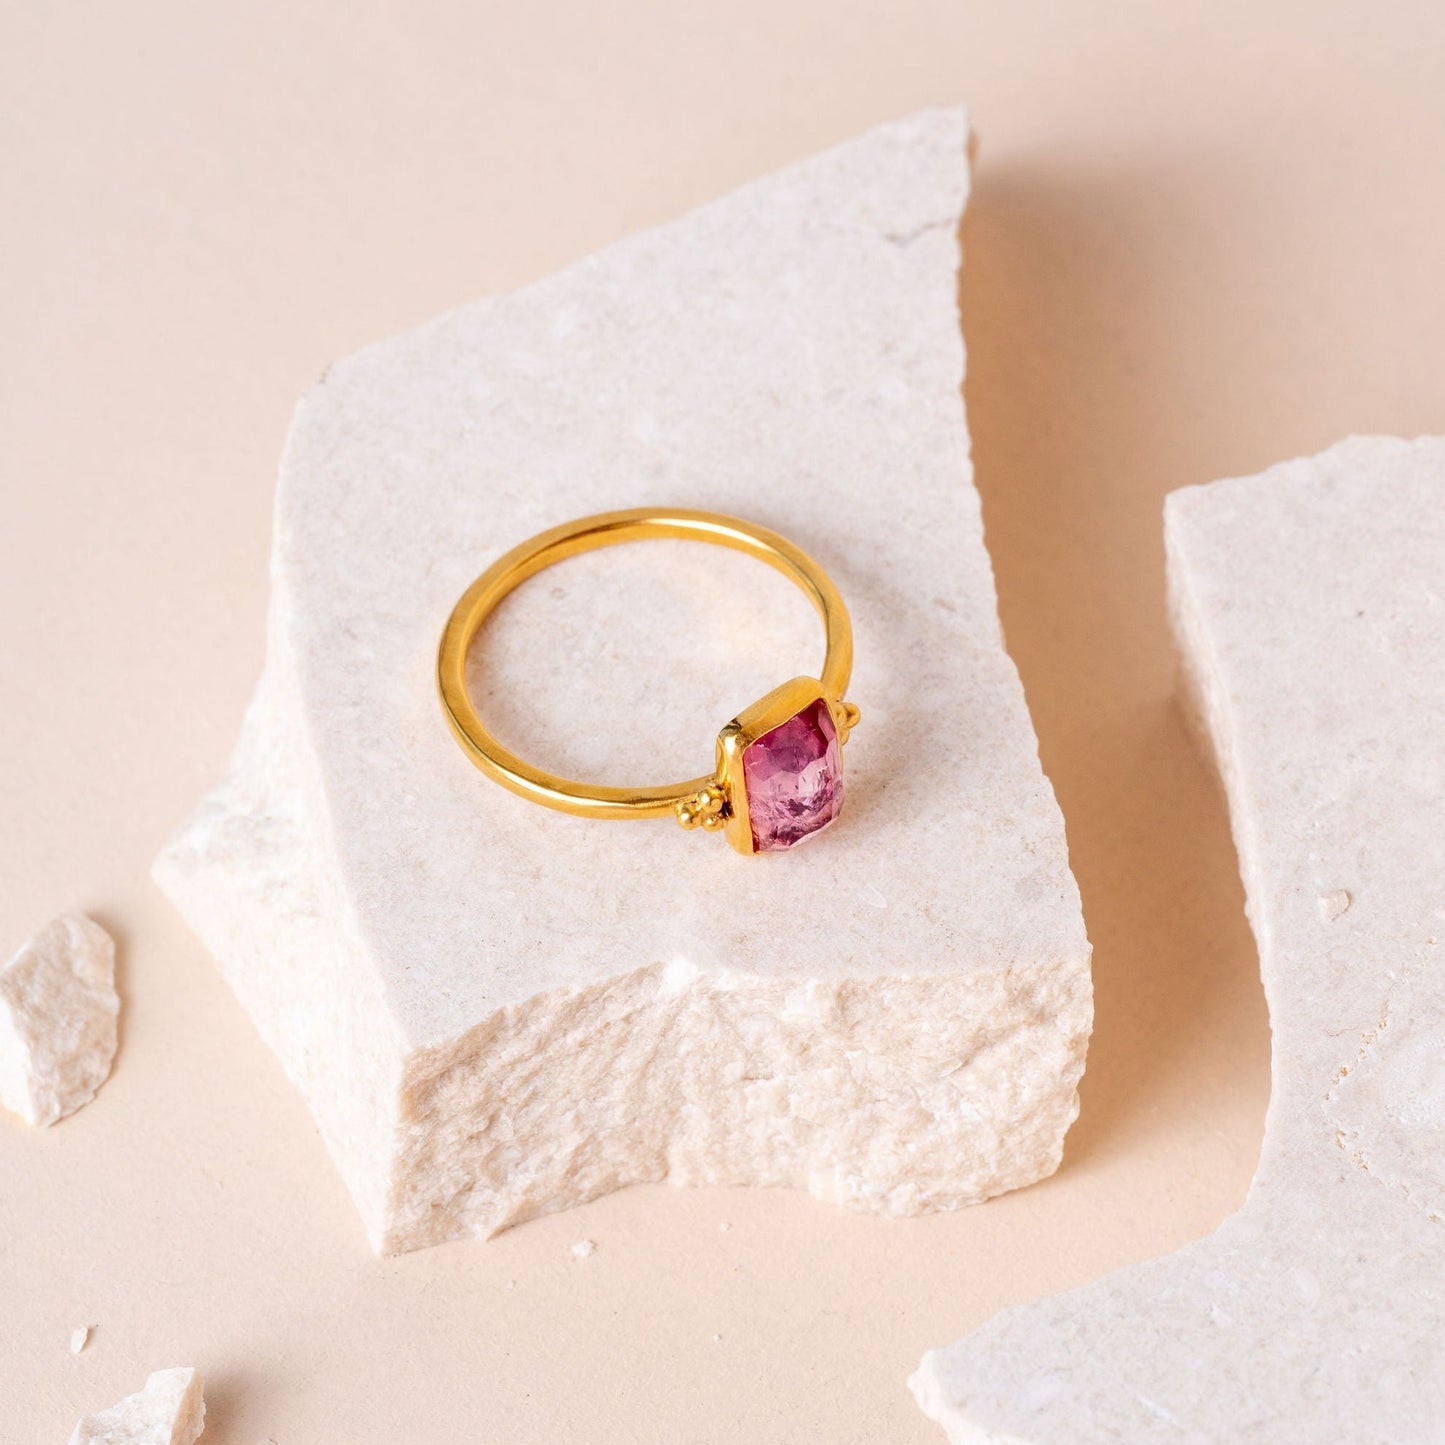 Handcrafted gold ring adorned with a delicate pink tourmaline and dainty granulation.